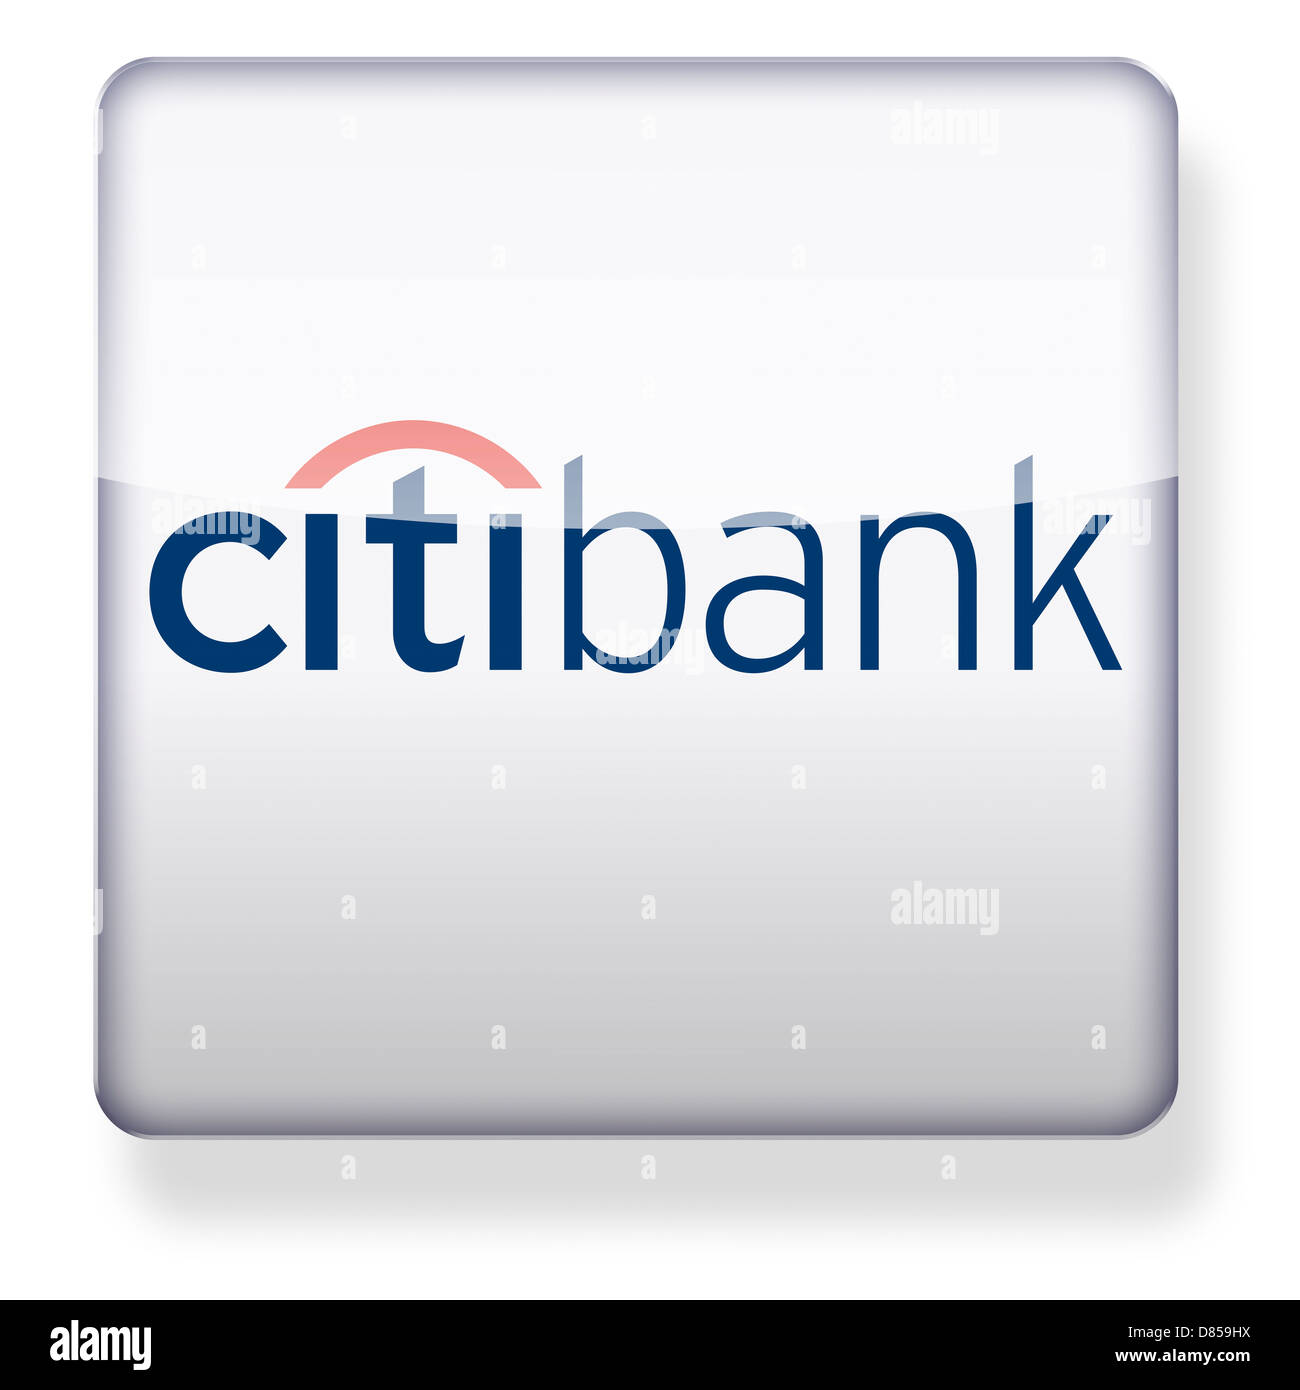 Citibank logo as an app icon. Clipping path included. Stock Photo